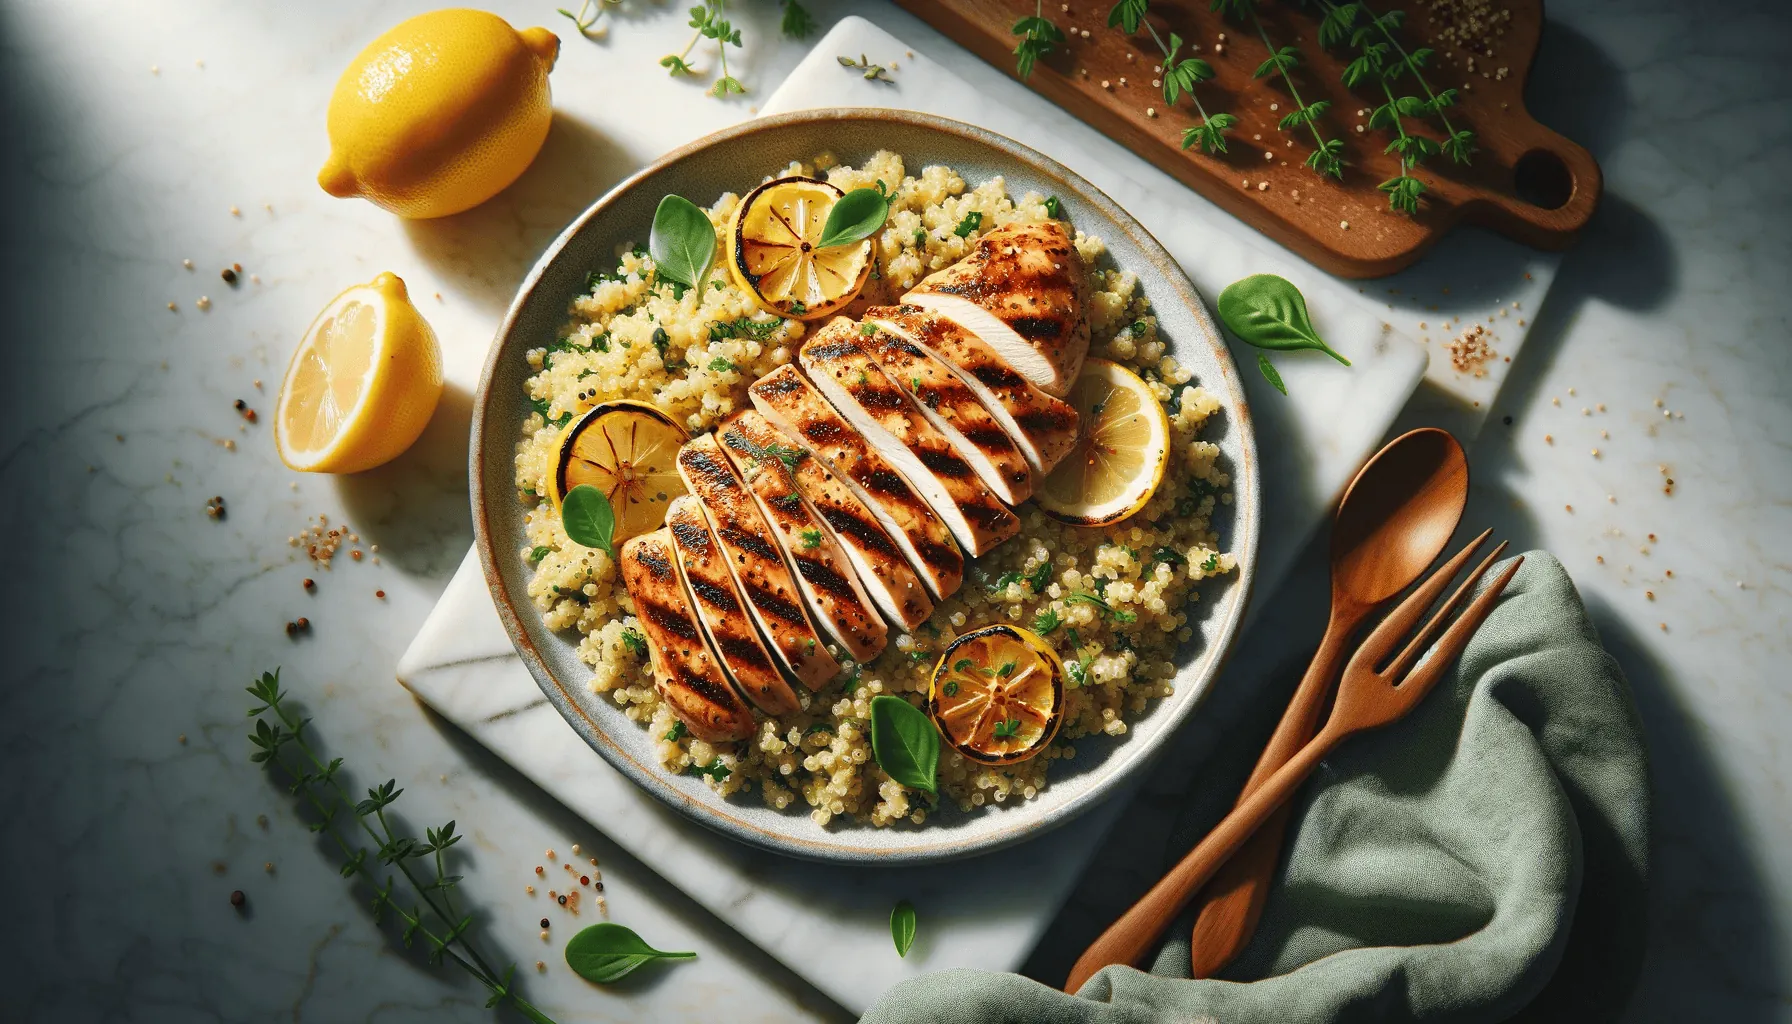 Lemon herb quinoa with grilled chicken, ready to serve